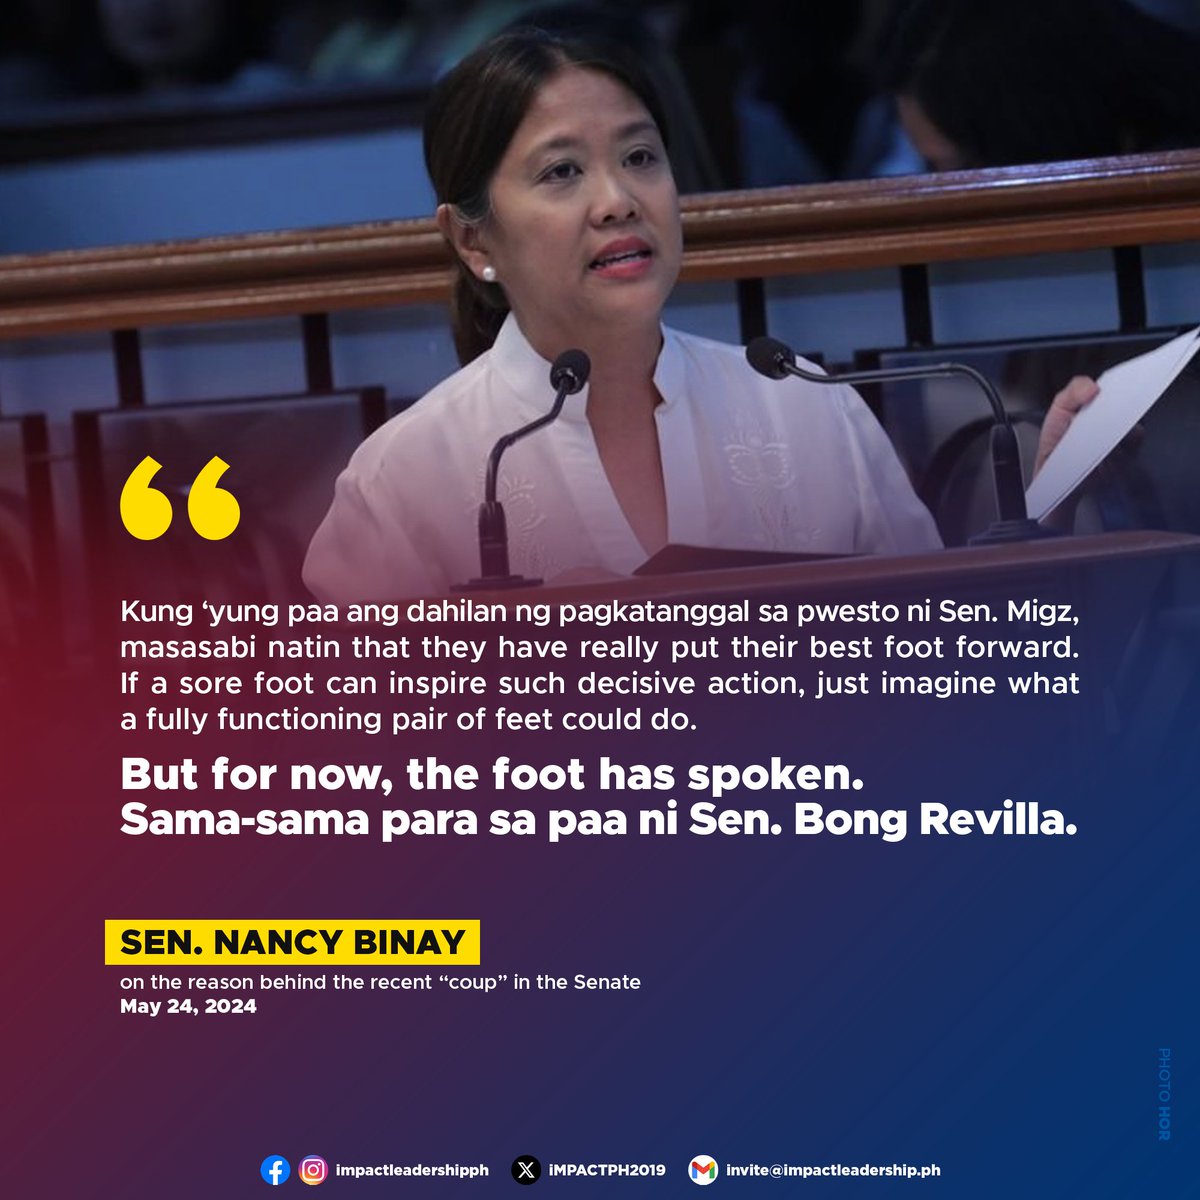 'THE FOOT HAS SPOKEN'

Sen. Nancy Binay says she was surprised to learn that the reason behind the recent 'coup' in the Senate was a sore foot.